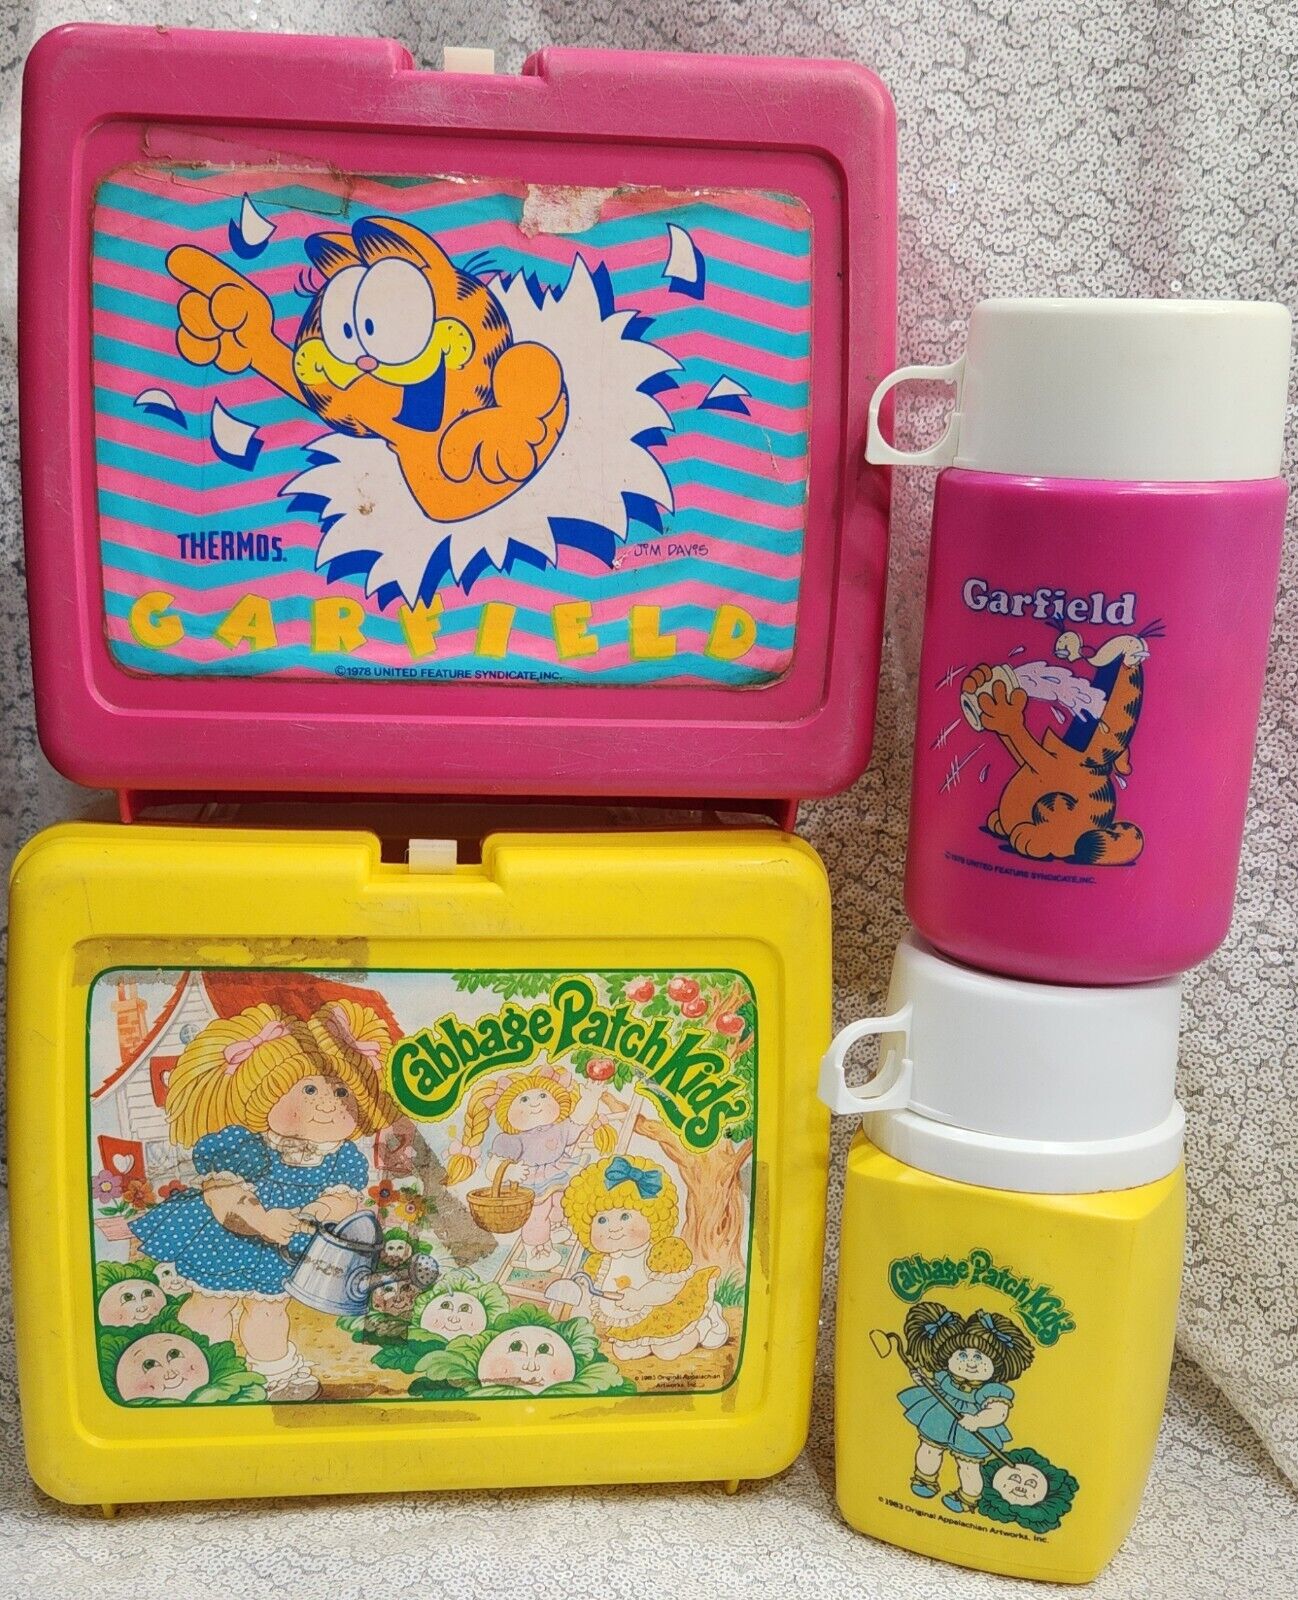 Vintage 1978 Thermos Cabbage Patch Kids & Garfield Lunch Box & Thermos Set